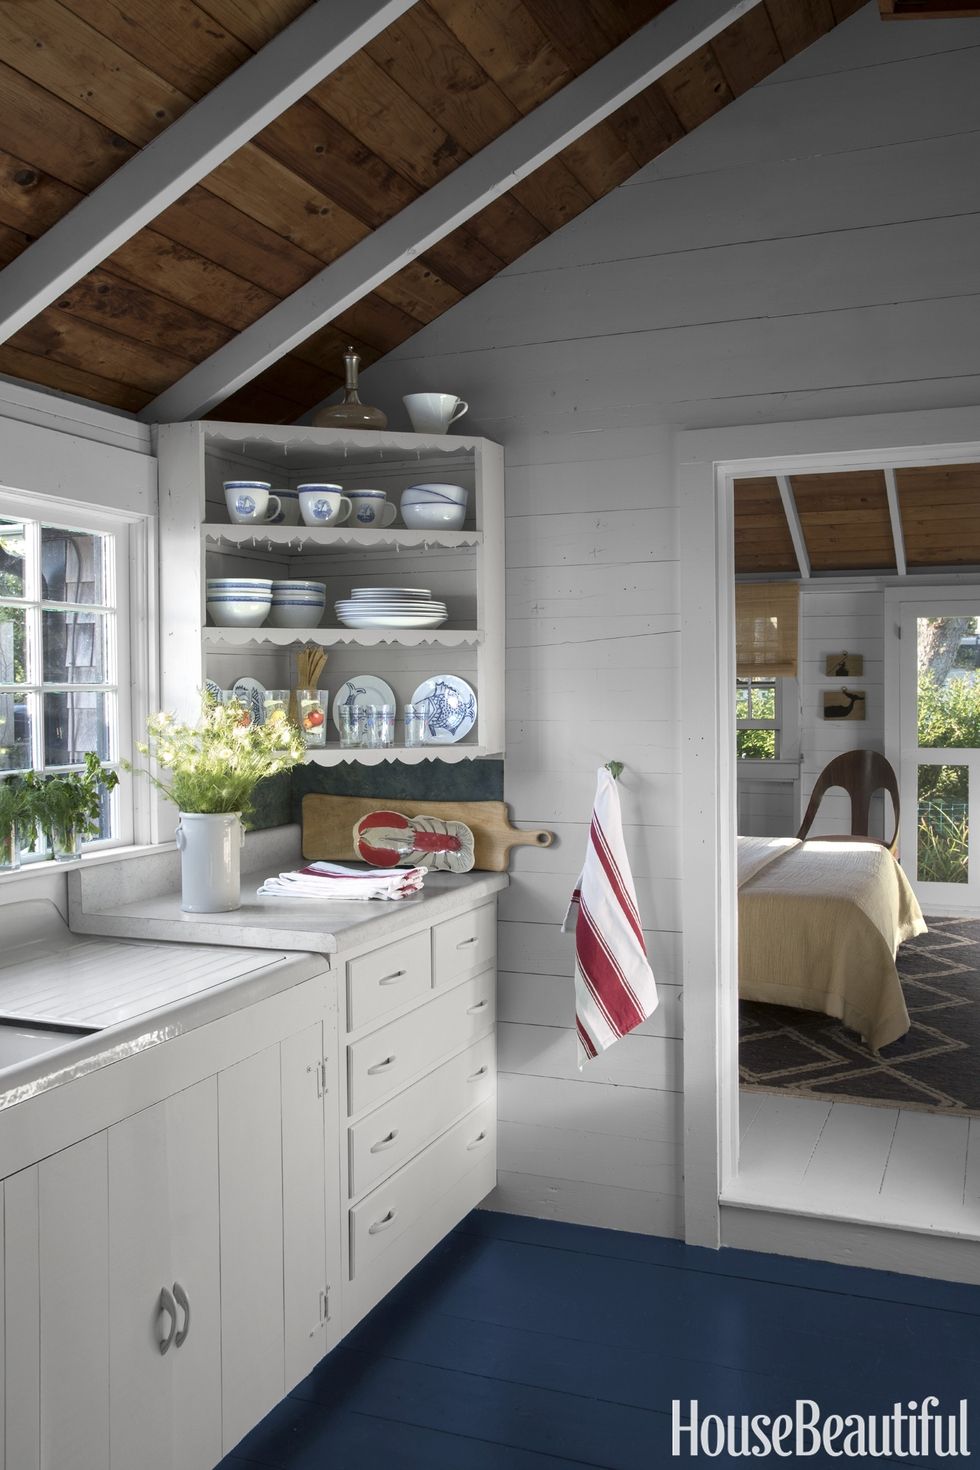 Red, white, and blue decor in a Nantucket rustic kitchen. COME TOUR MORE Nantucket Style Chic & Summer Vibes! #nantucket #interiordesign #designinspiration #summerliving #coastalstyle